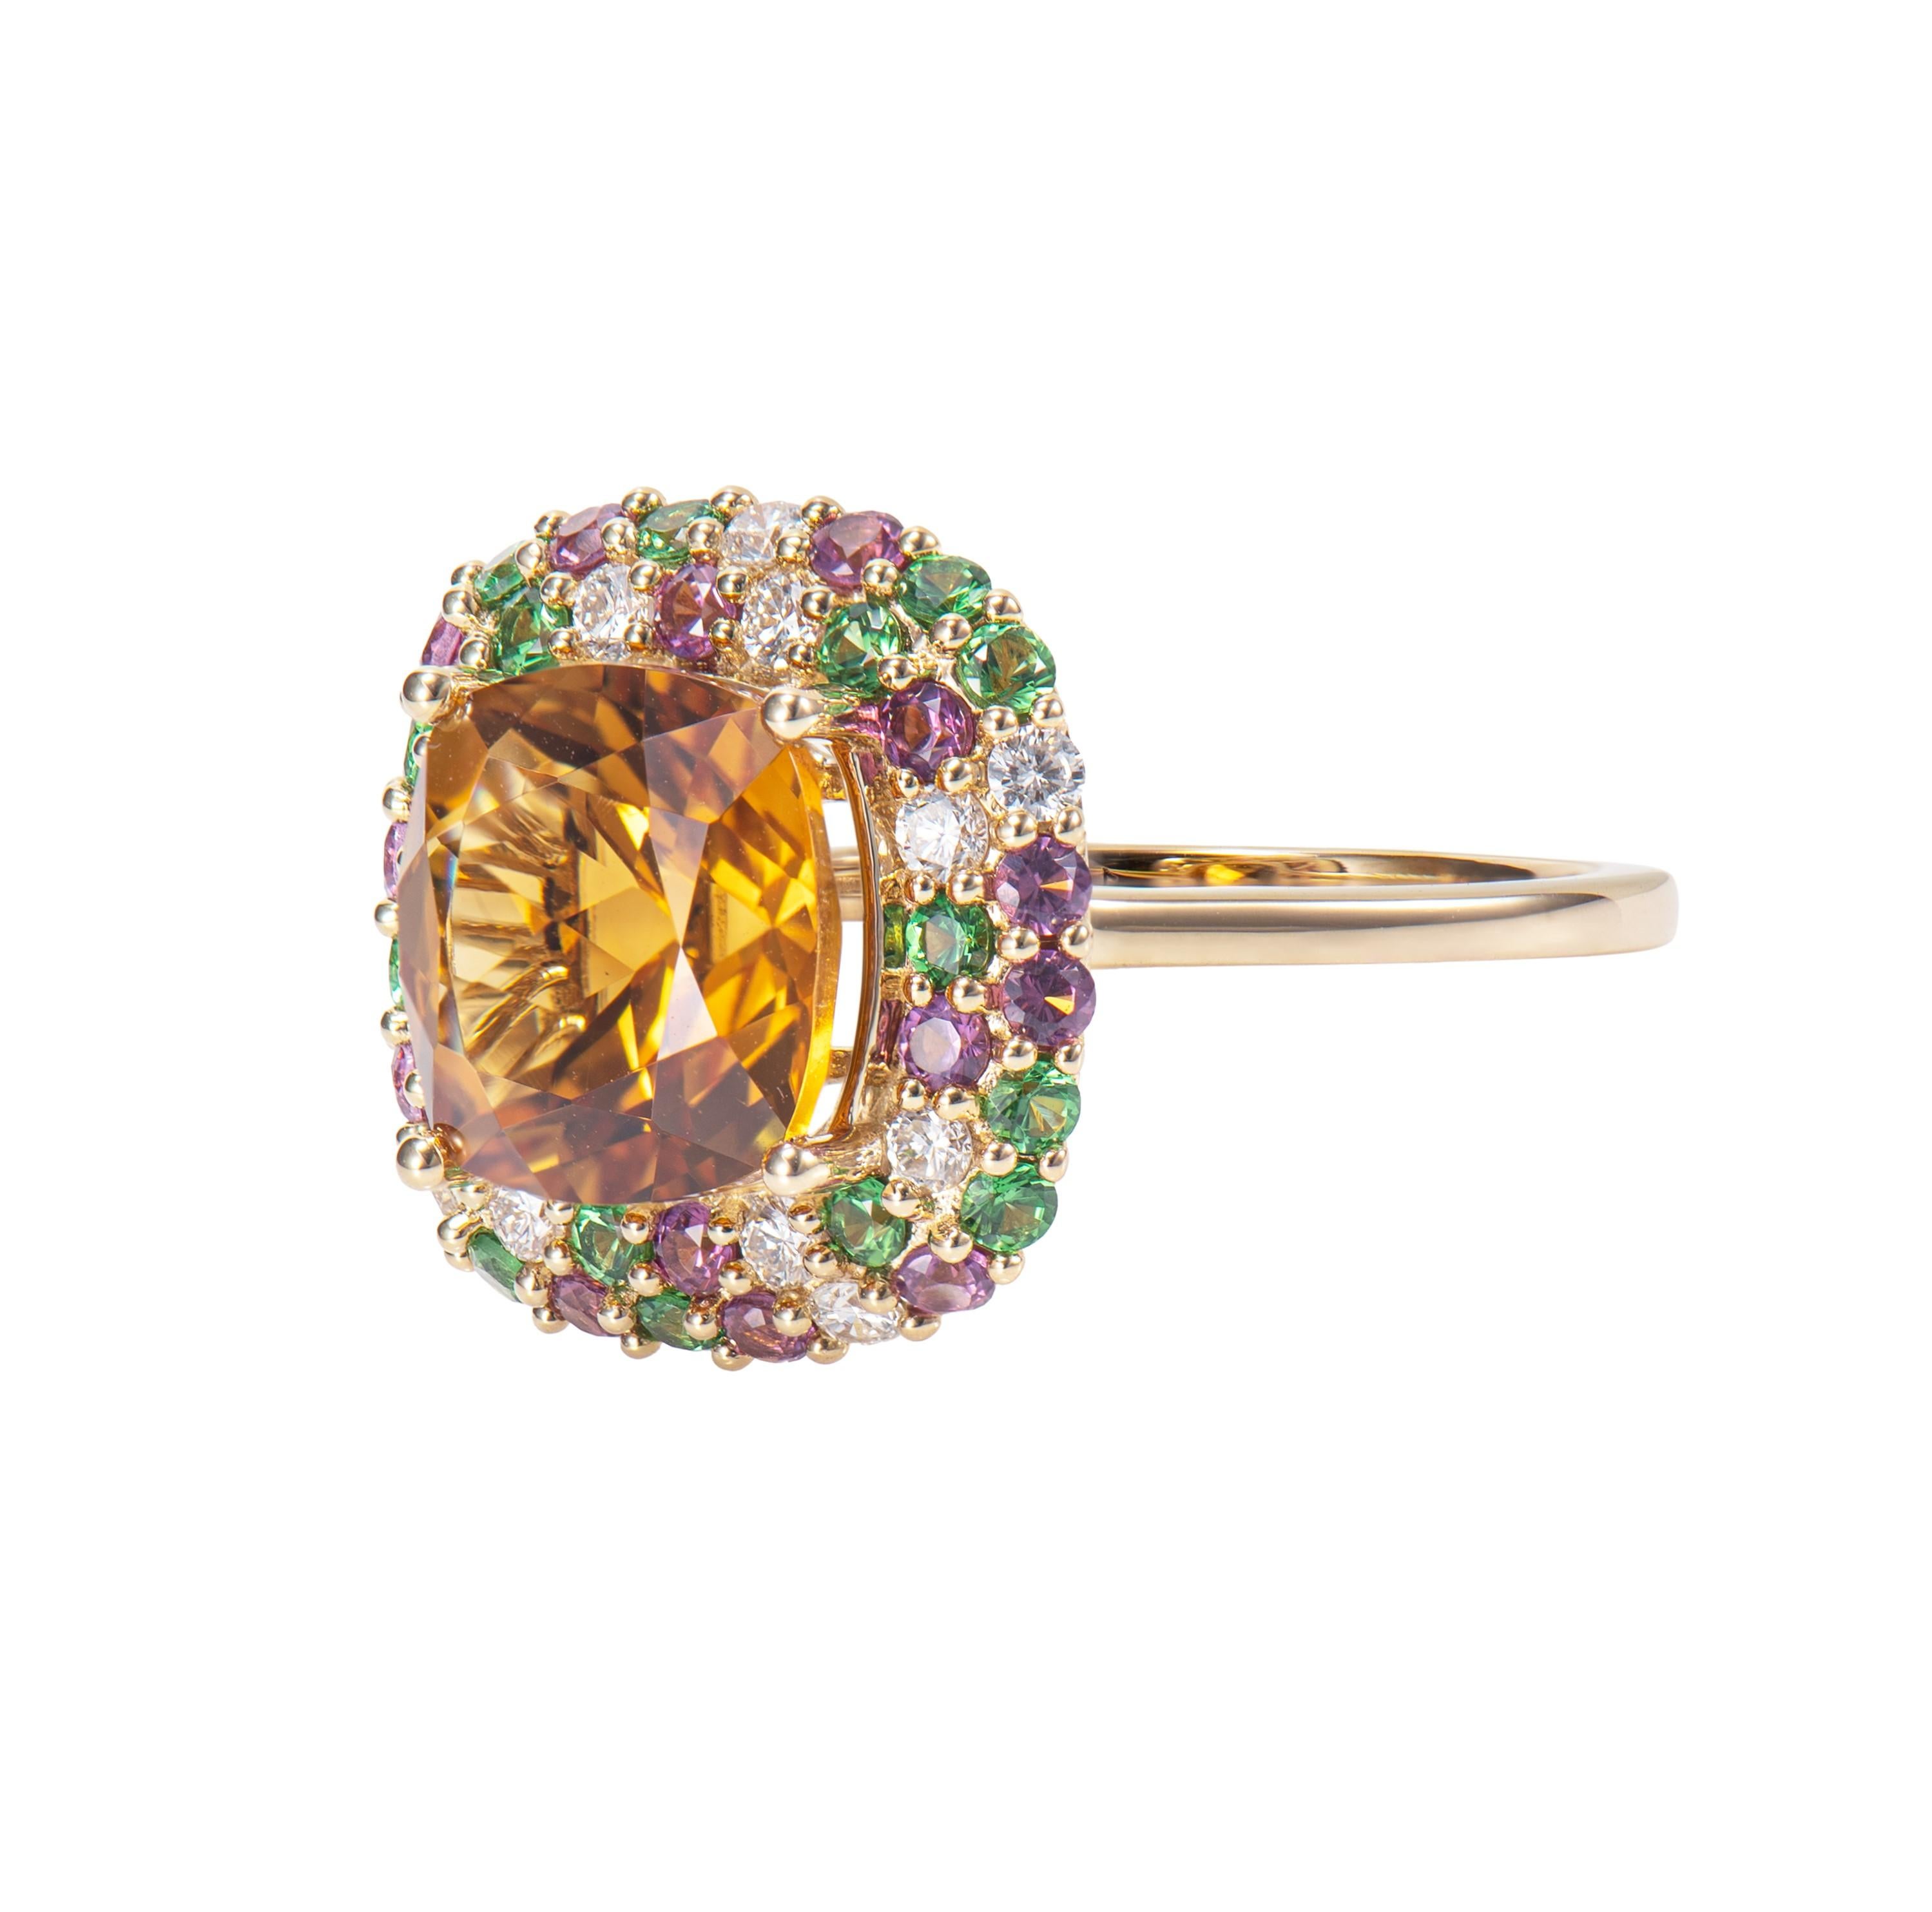 Cushion Cut 3.93 Carat Citrine Cocktail Ring in 14KRG with Tsavorite, Rhodolite and Diamond. For Sale